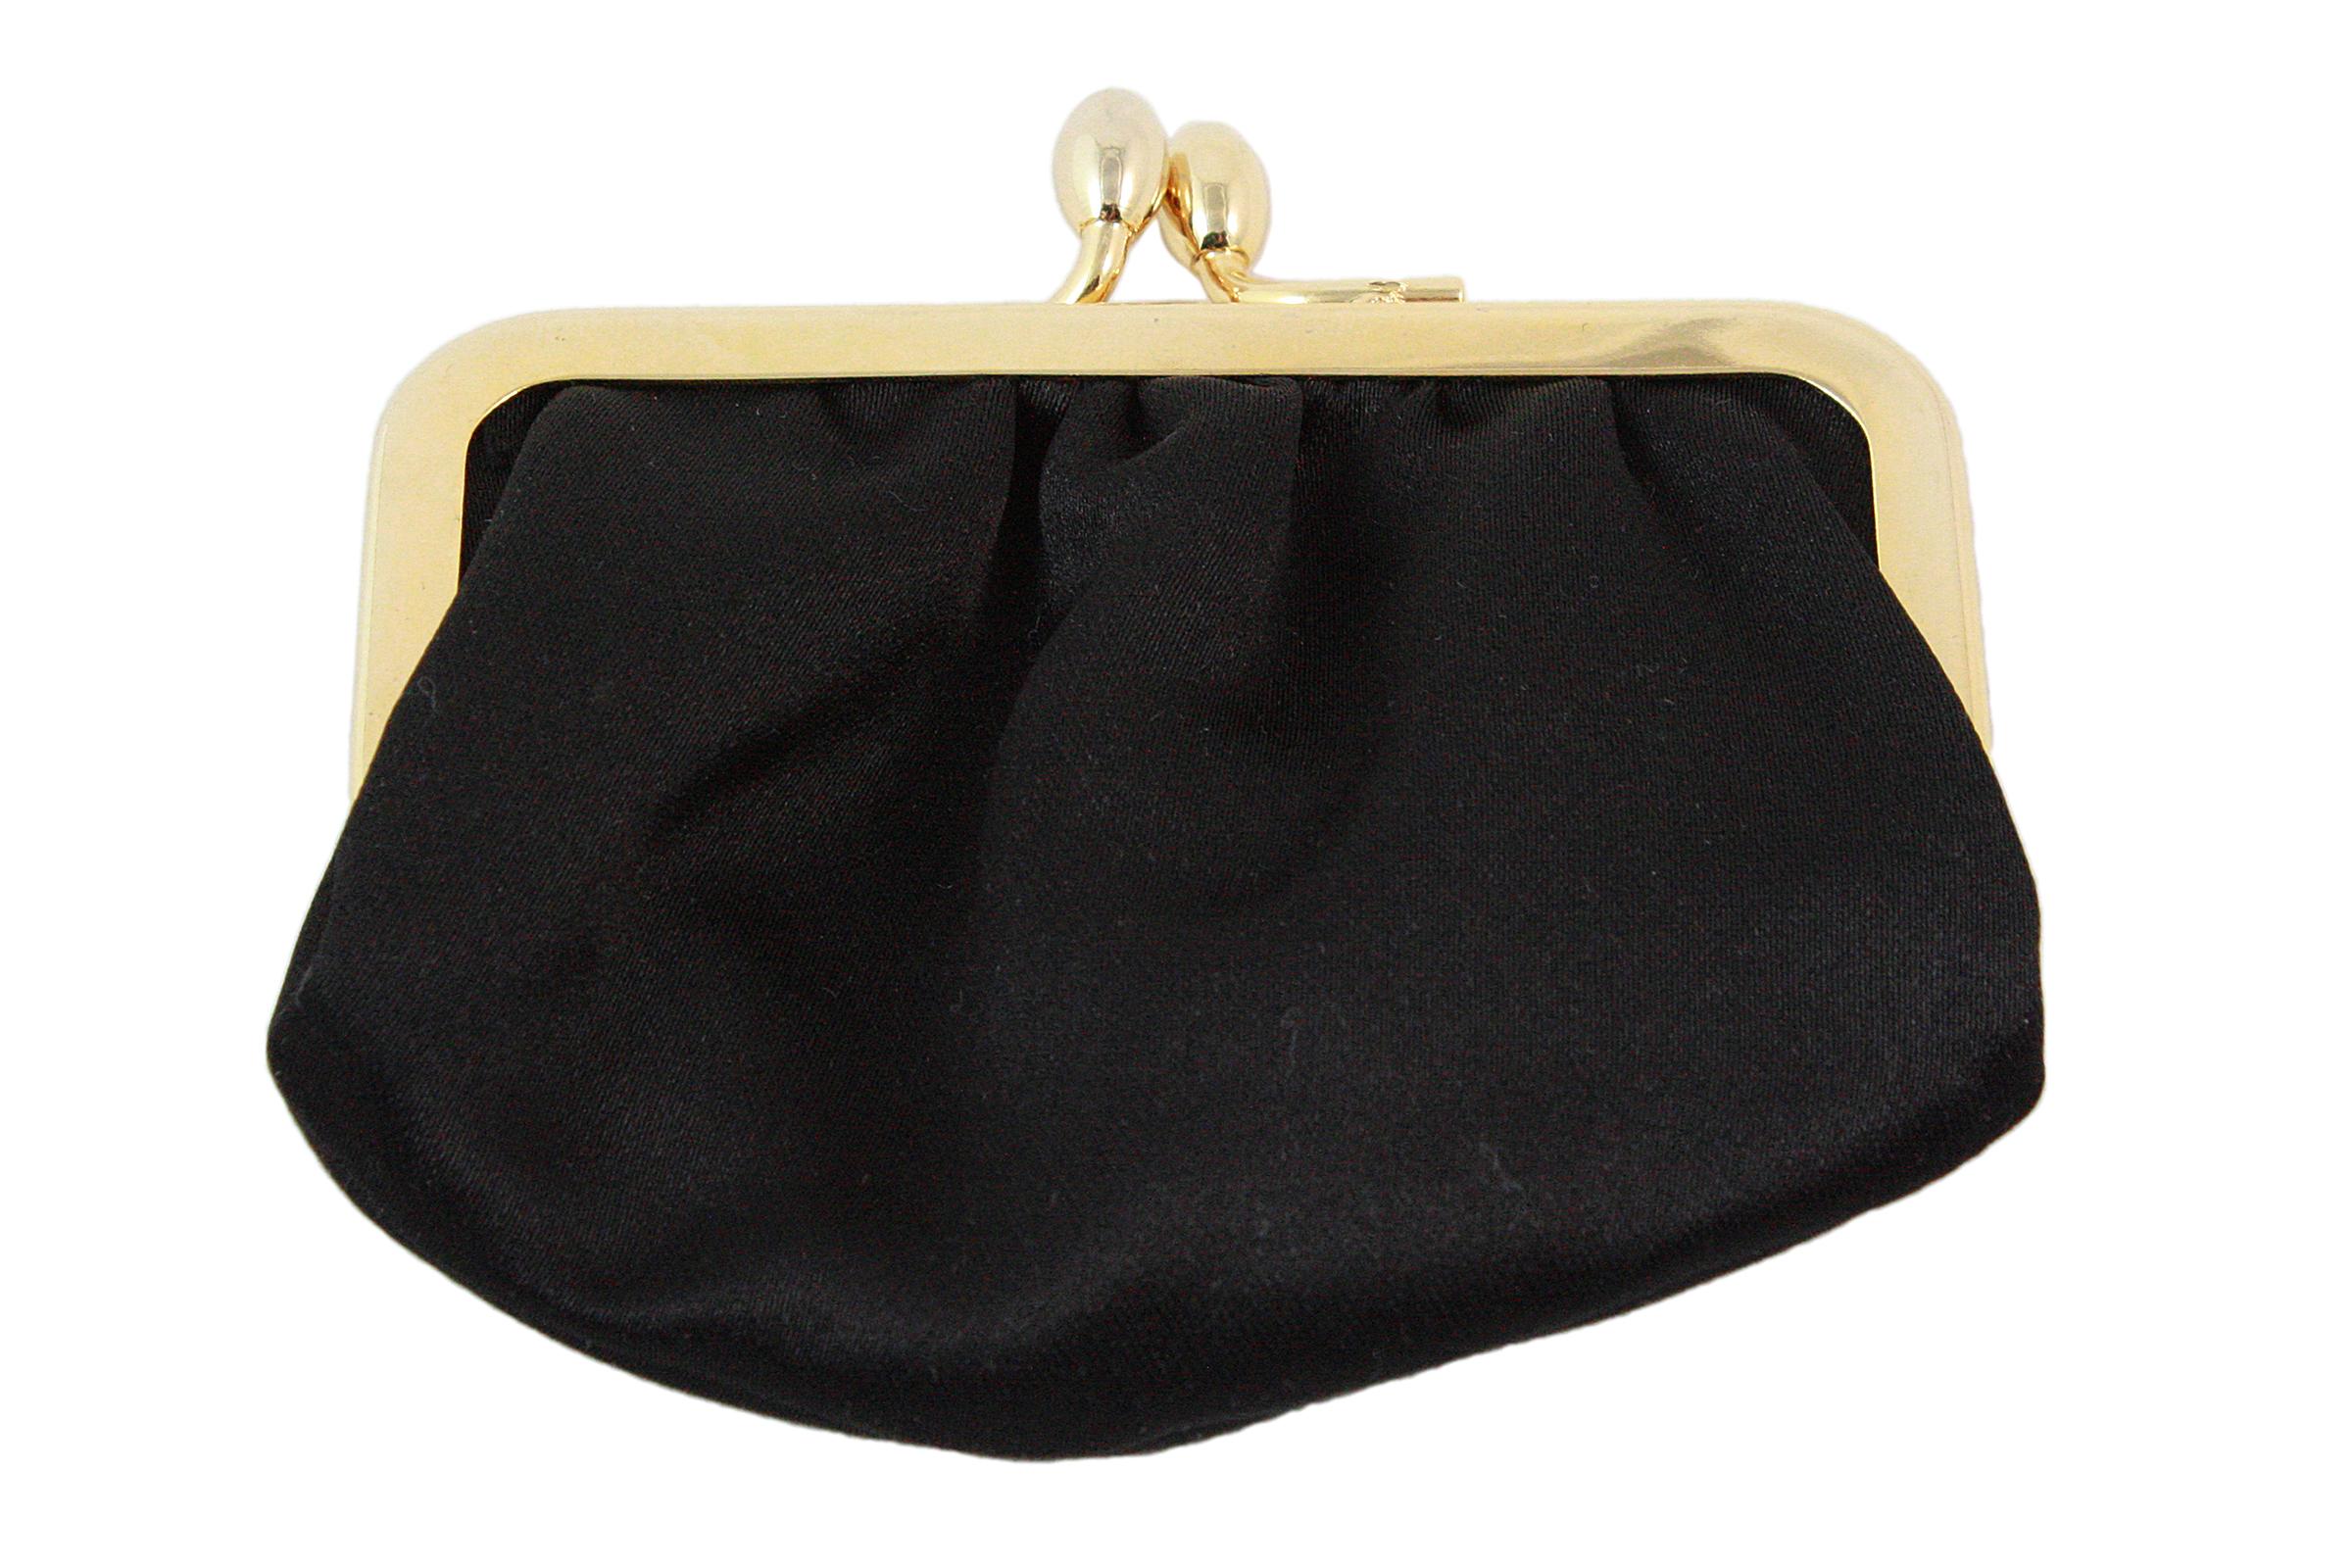 Judith Leiber Black Satin Crossbody Bag with Gold Infinity Chain For Sale 2